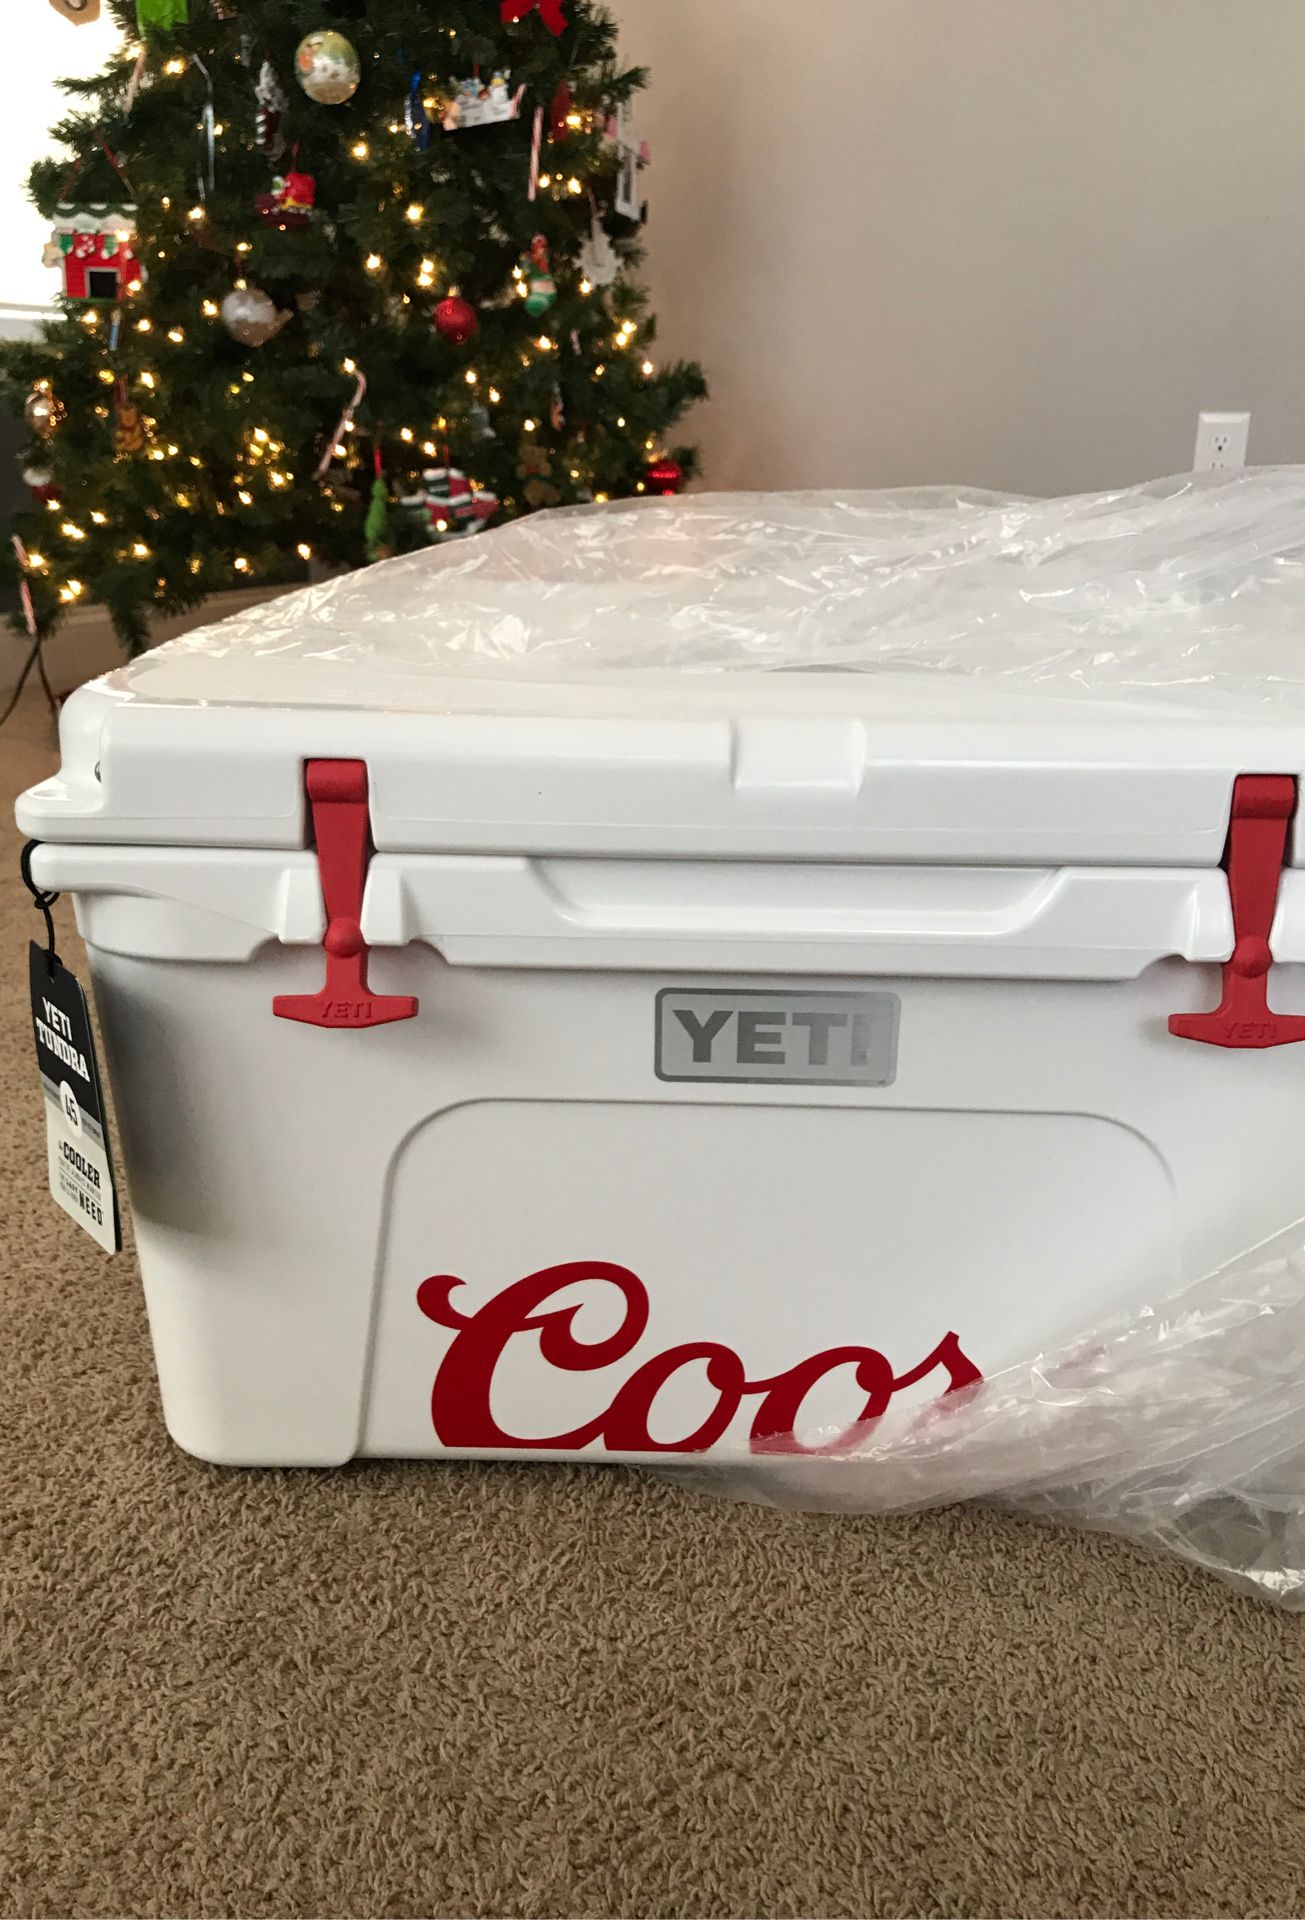 Coors Light Full Color White Yeti Colster - Small Batch Louisiana